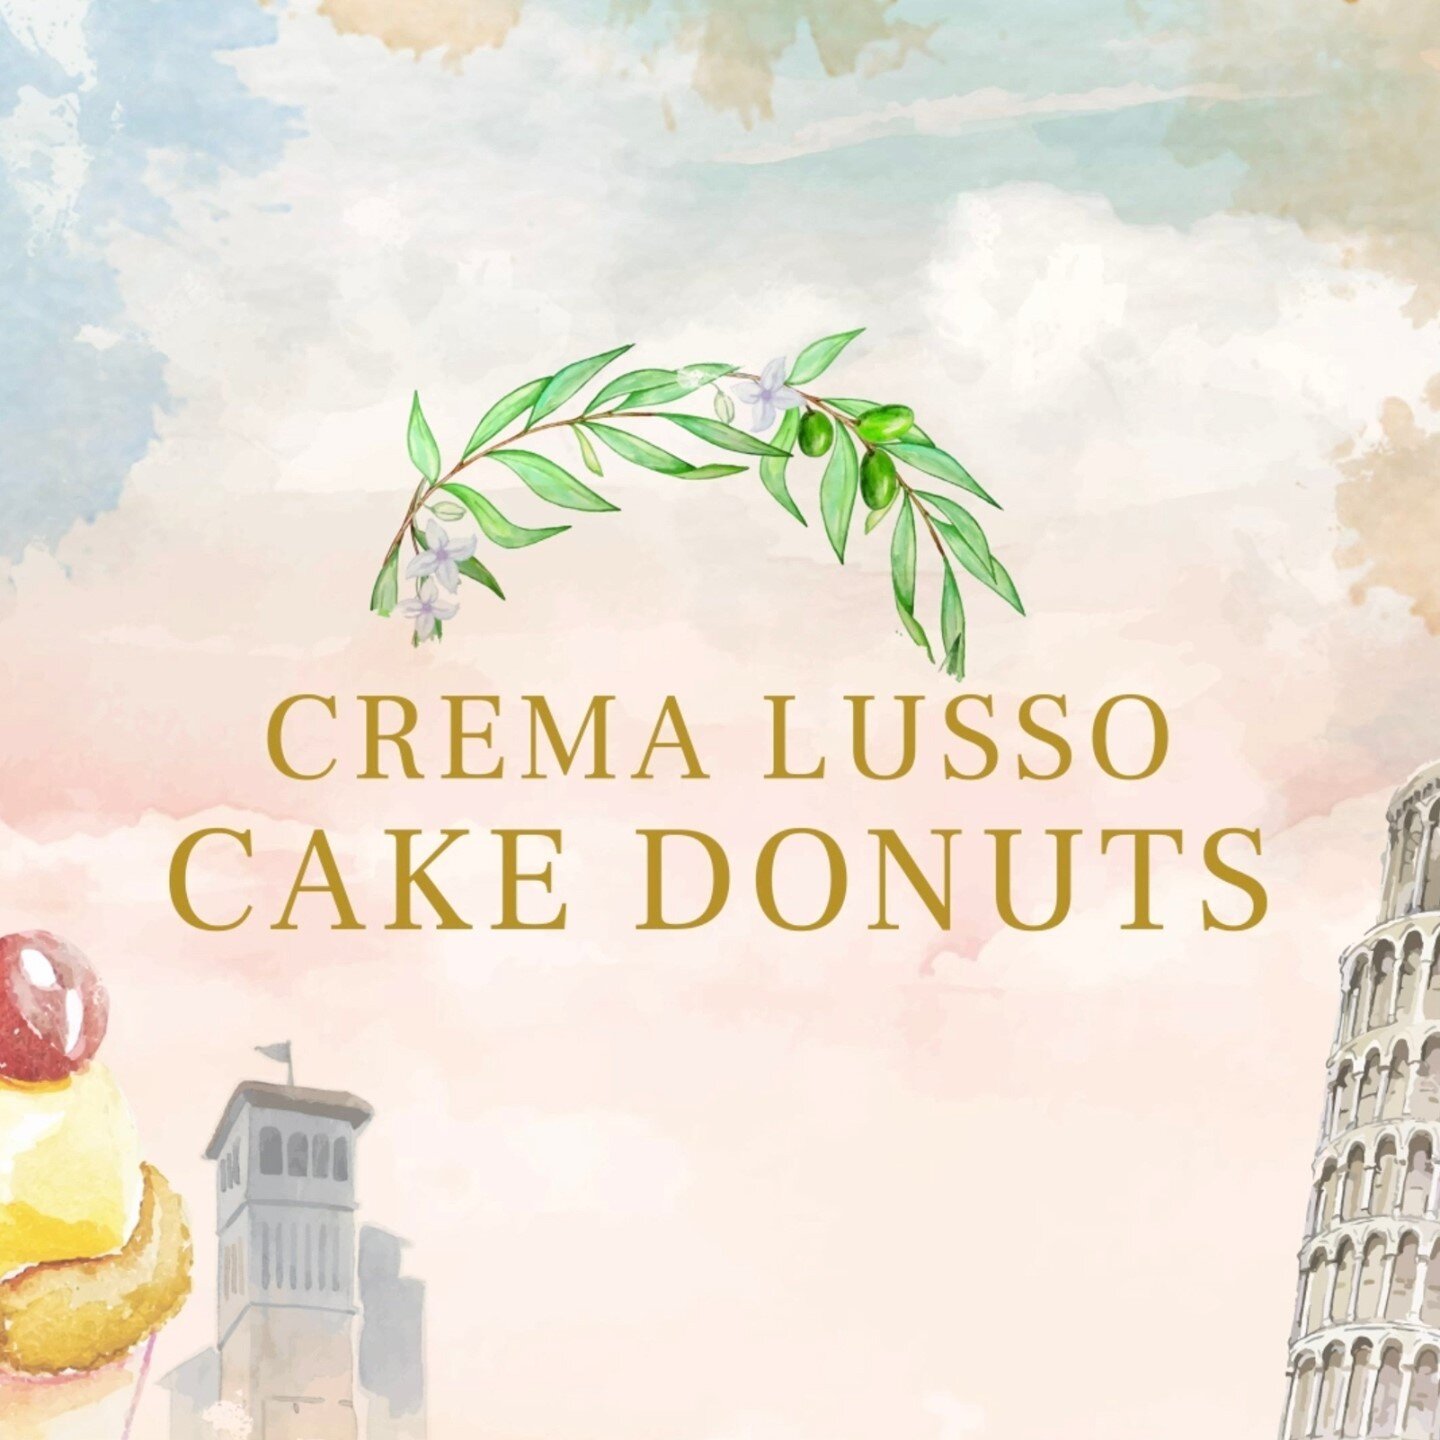 #sunday means it's a great day to indulge, so head over to our YouTube channel and follow along as we make our Crema Lusso Cake Donuts! #breakfastinbed ⁠
.⁠
.⁠
.⁠
.⁠
#cremalusso #dessertmix #liquidmix #shelfstable #delicious #baking #chef #homechef #